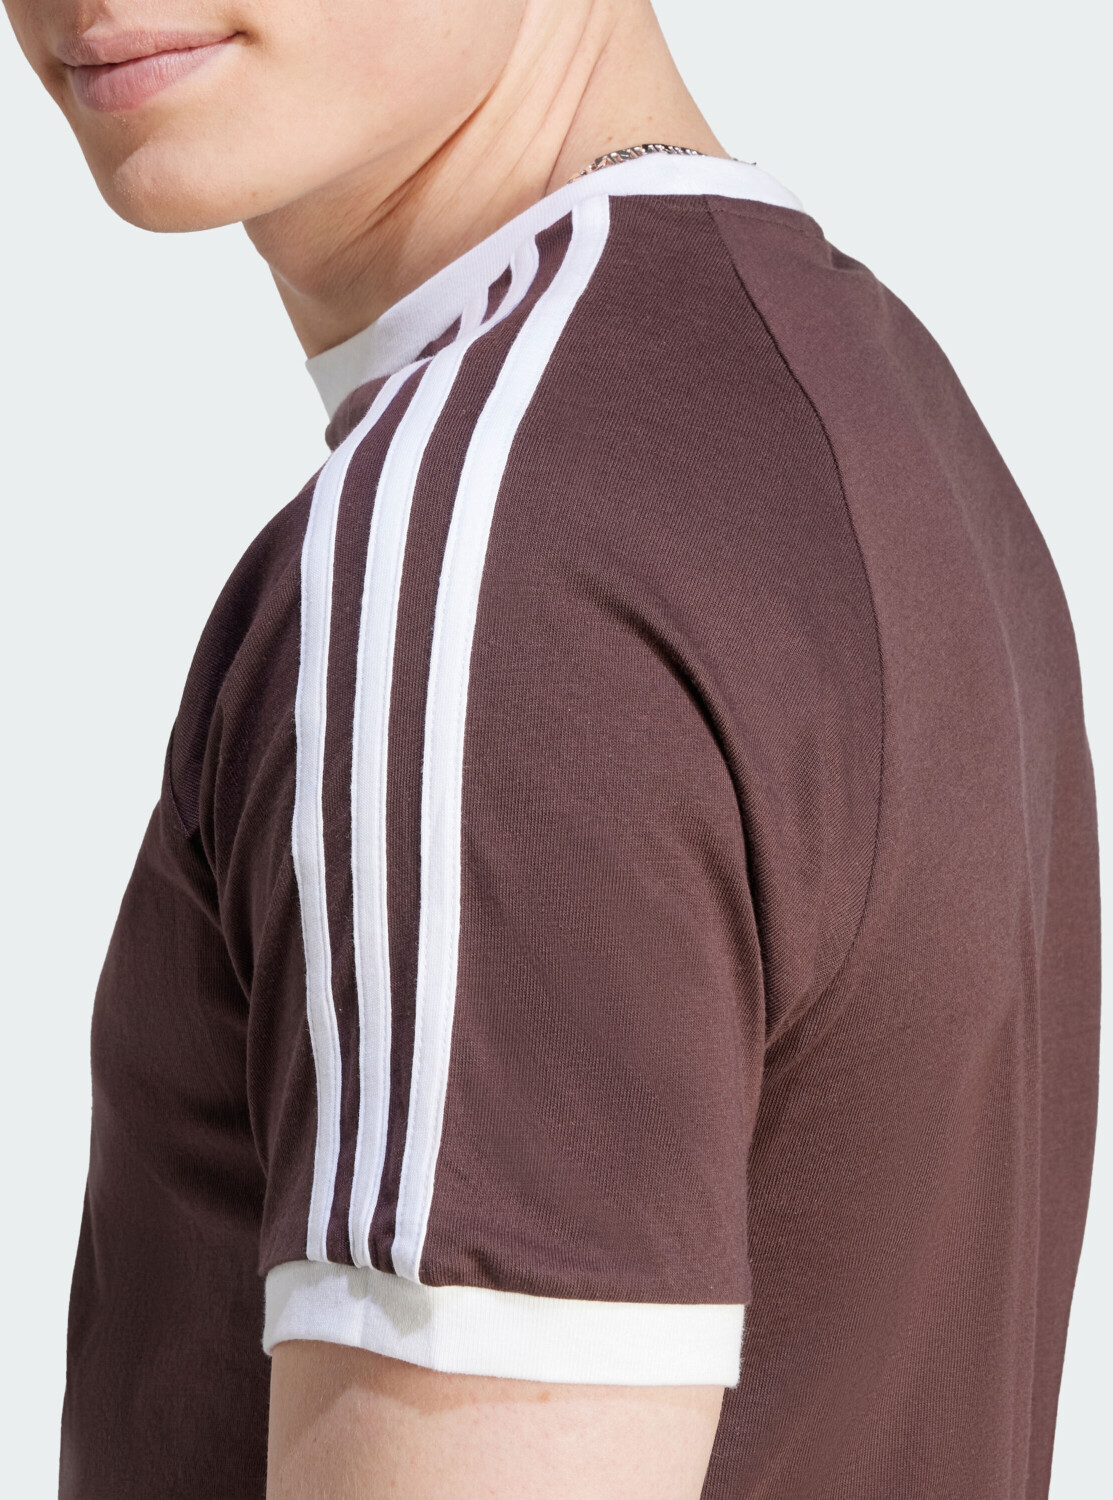 adicolor T-Shirt Best from (Today) on 3-Stripes brown Classics Adidas shadow Deals – (IM2077) Buy £24.00